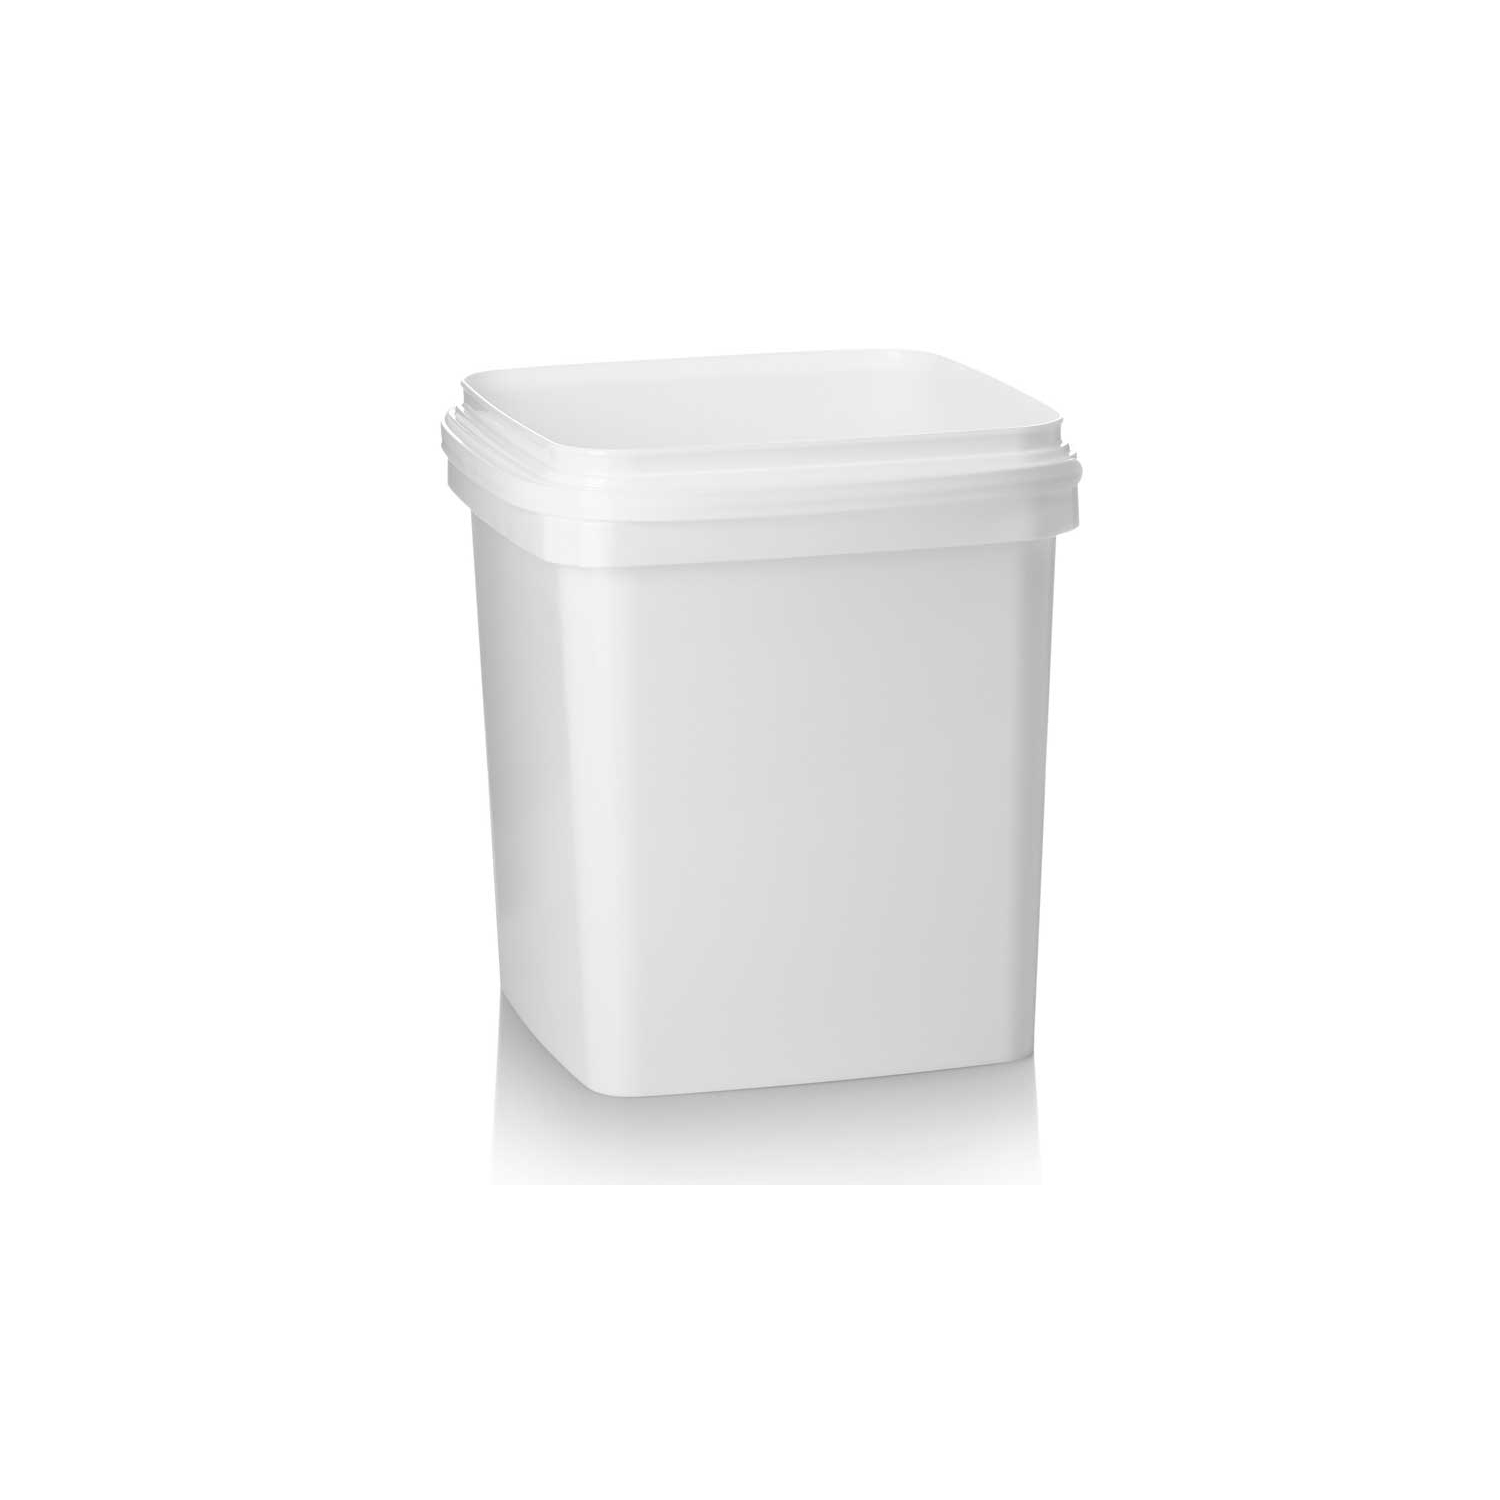 10ltr White PP Tamper Evident Square Pail with Plastic Handle